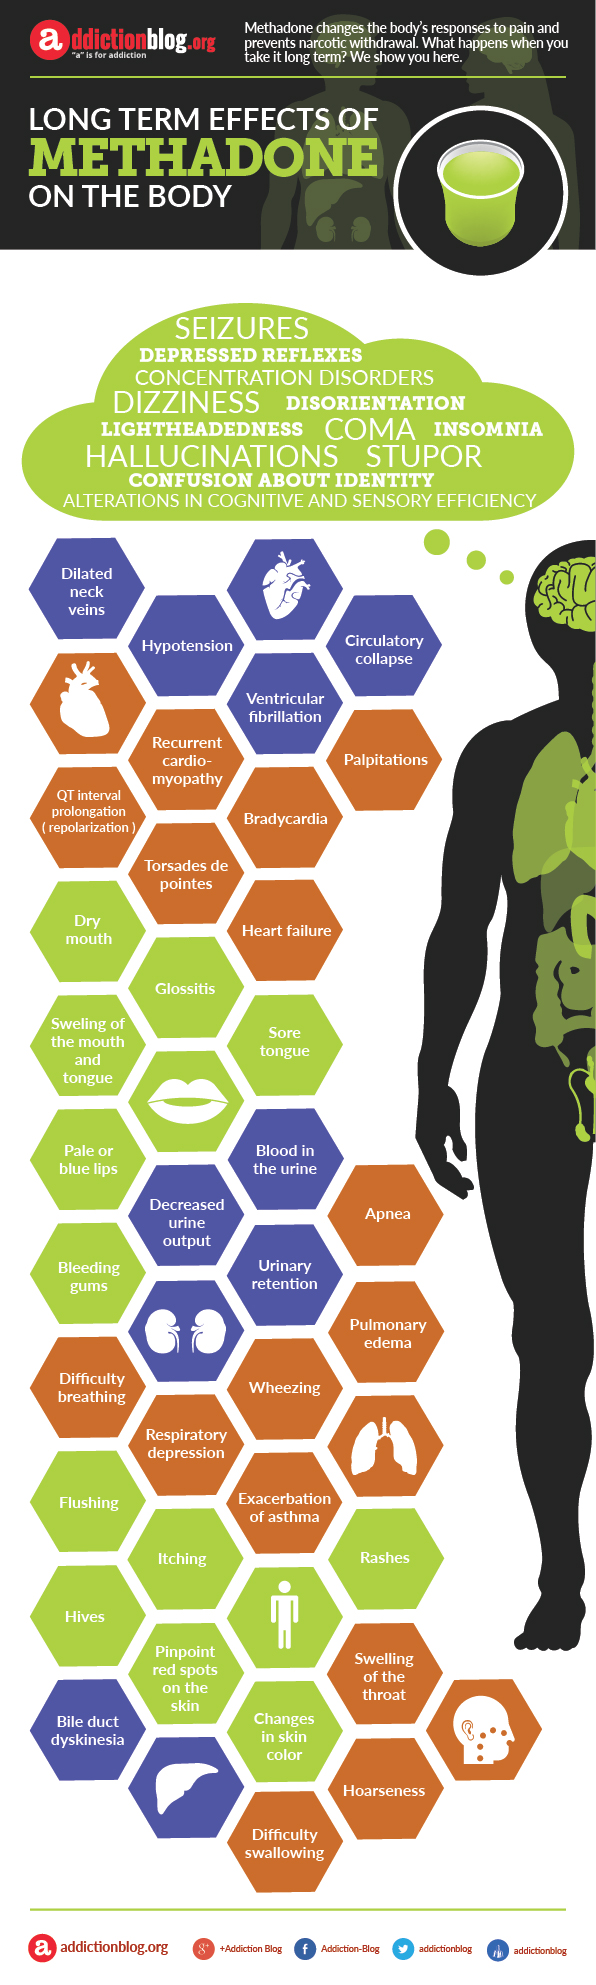 Long term effects of methadone on the body (INFOGRAPHIC)